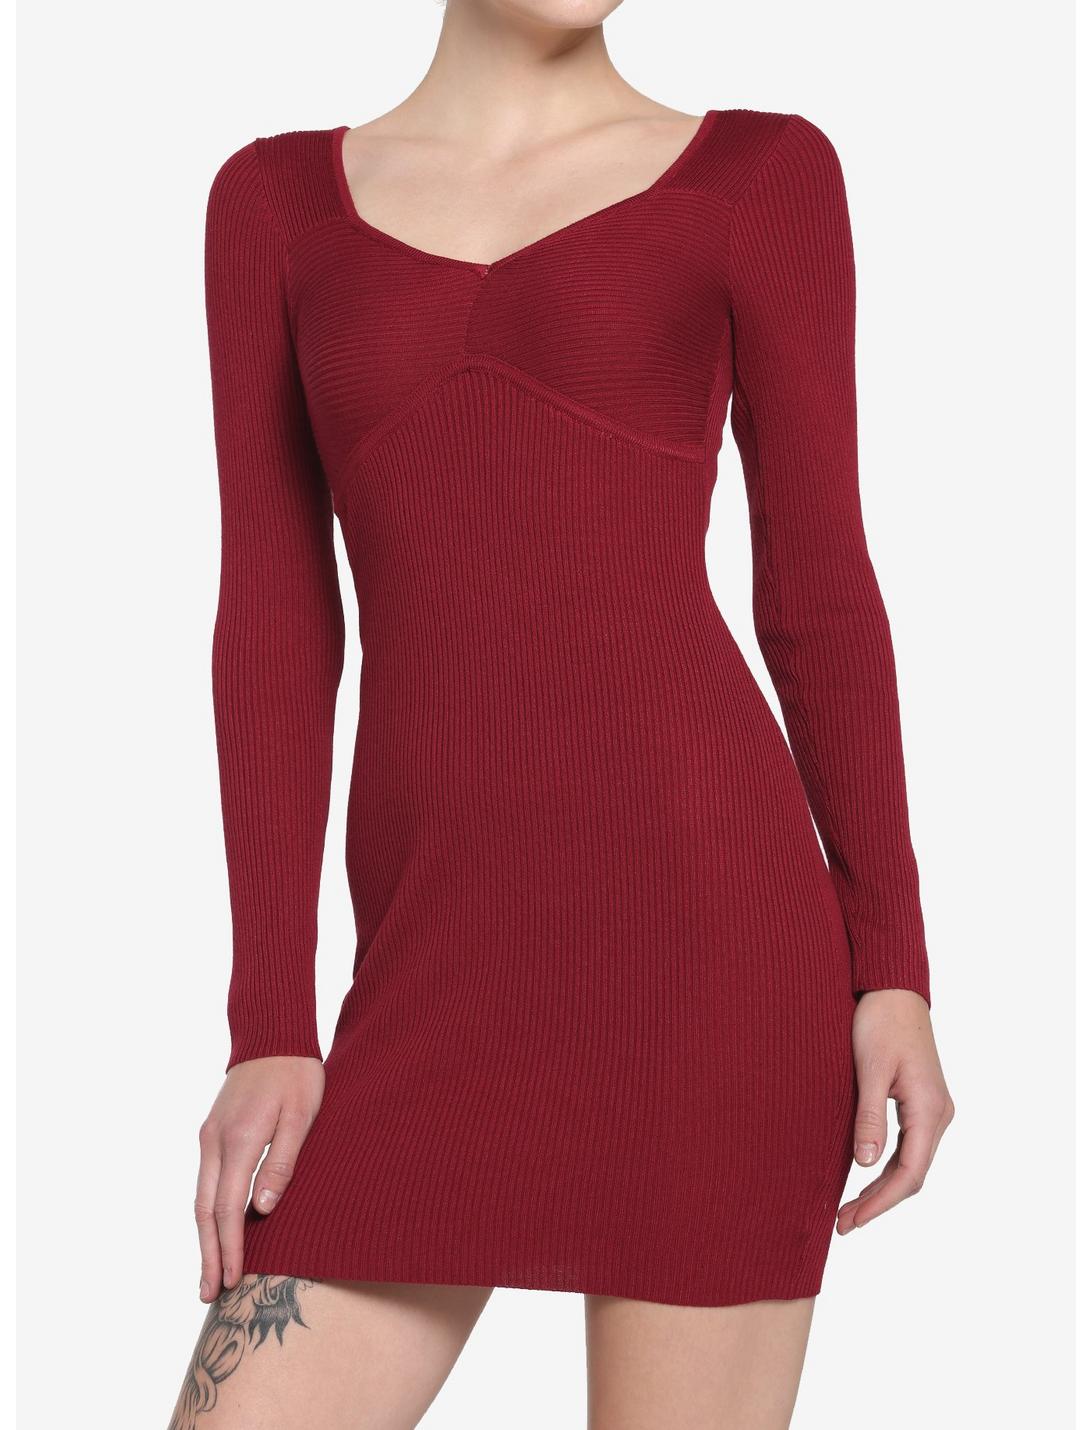 Red Ribbed Long-Sleeve Dress, RED, hi-res